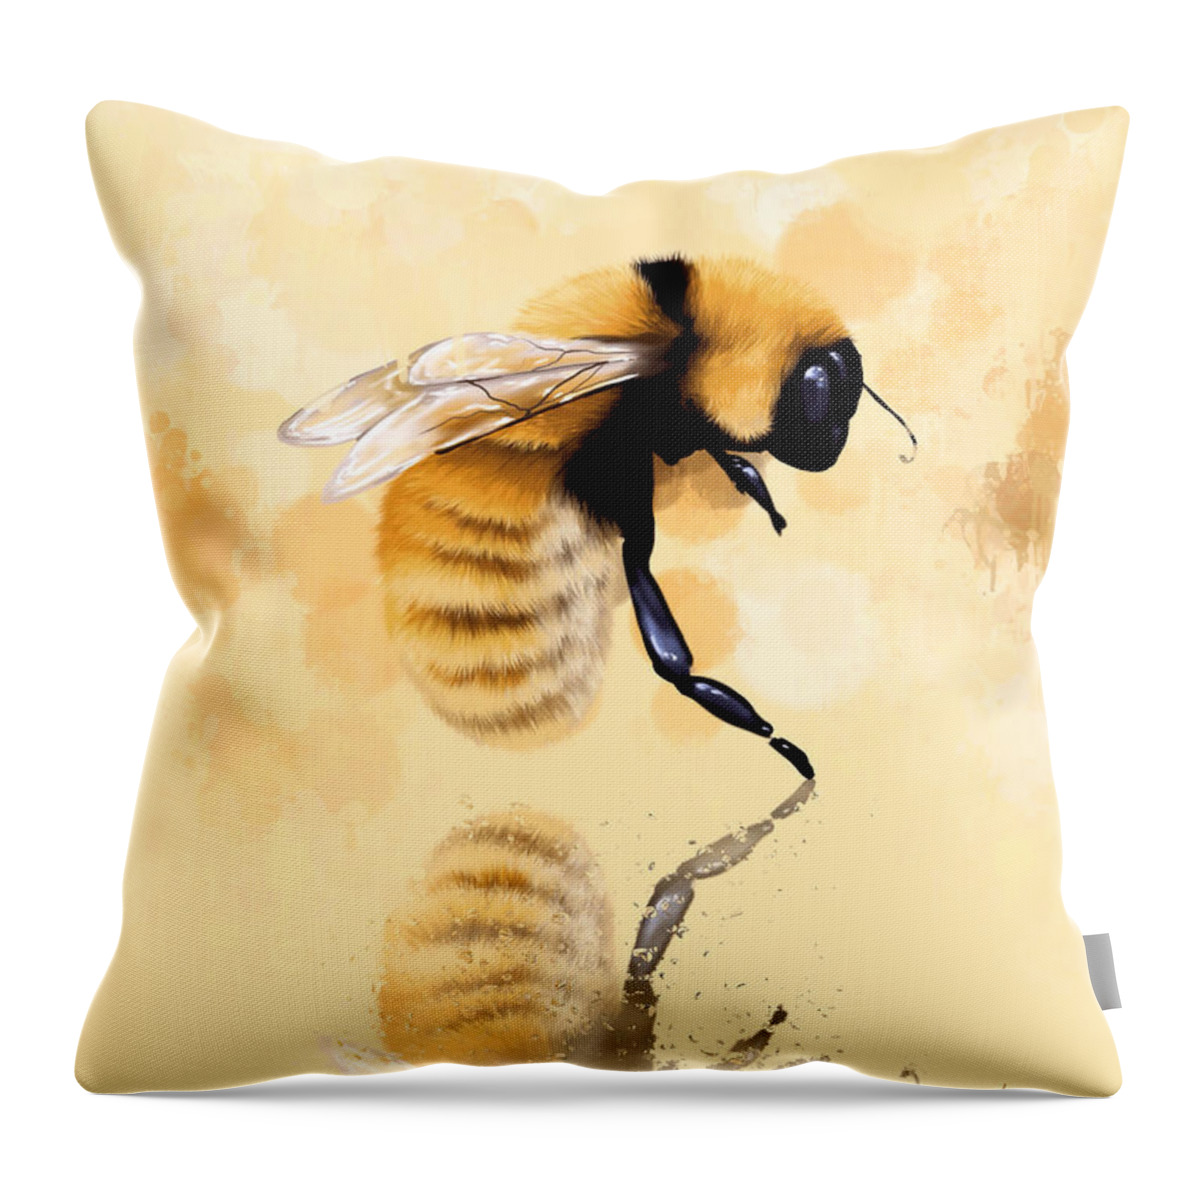 Bee Throw Pillow featuring the painting Bee by Veronica Minozzi